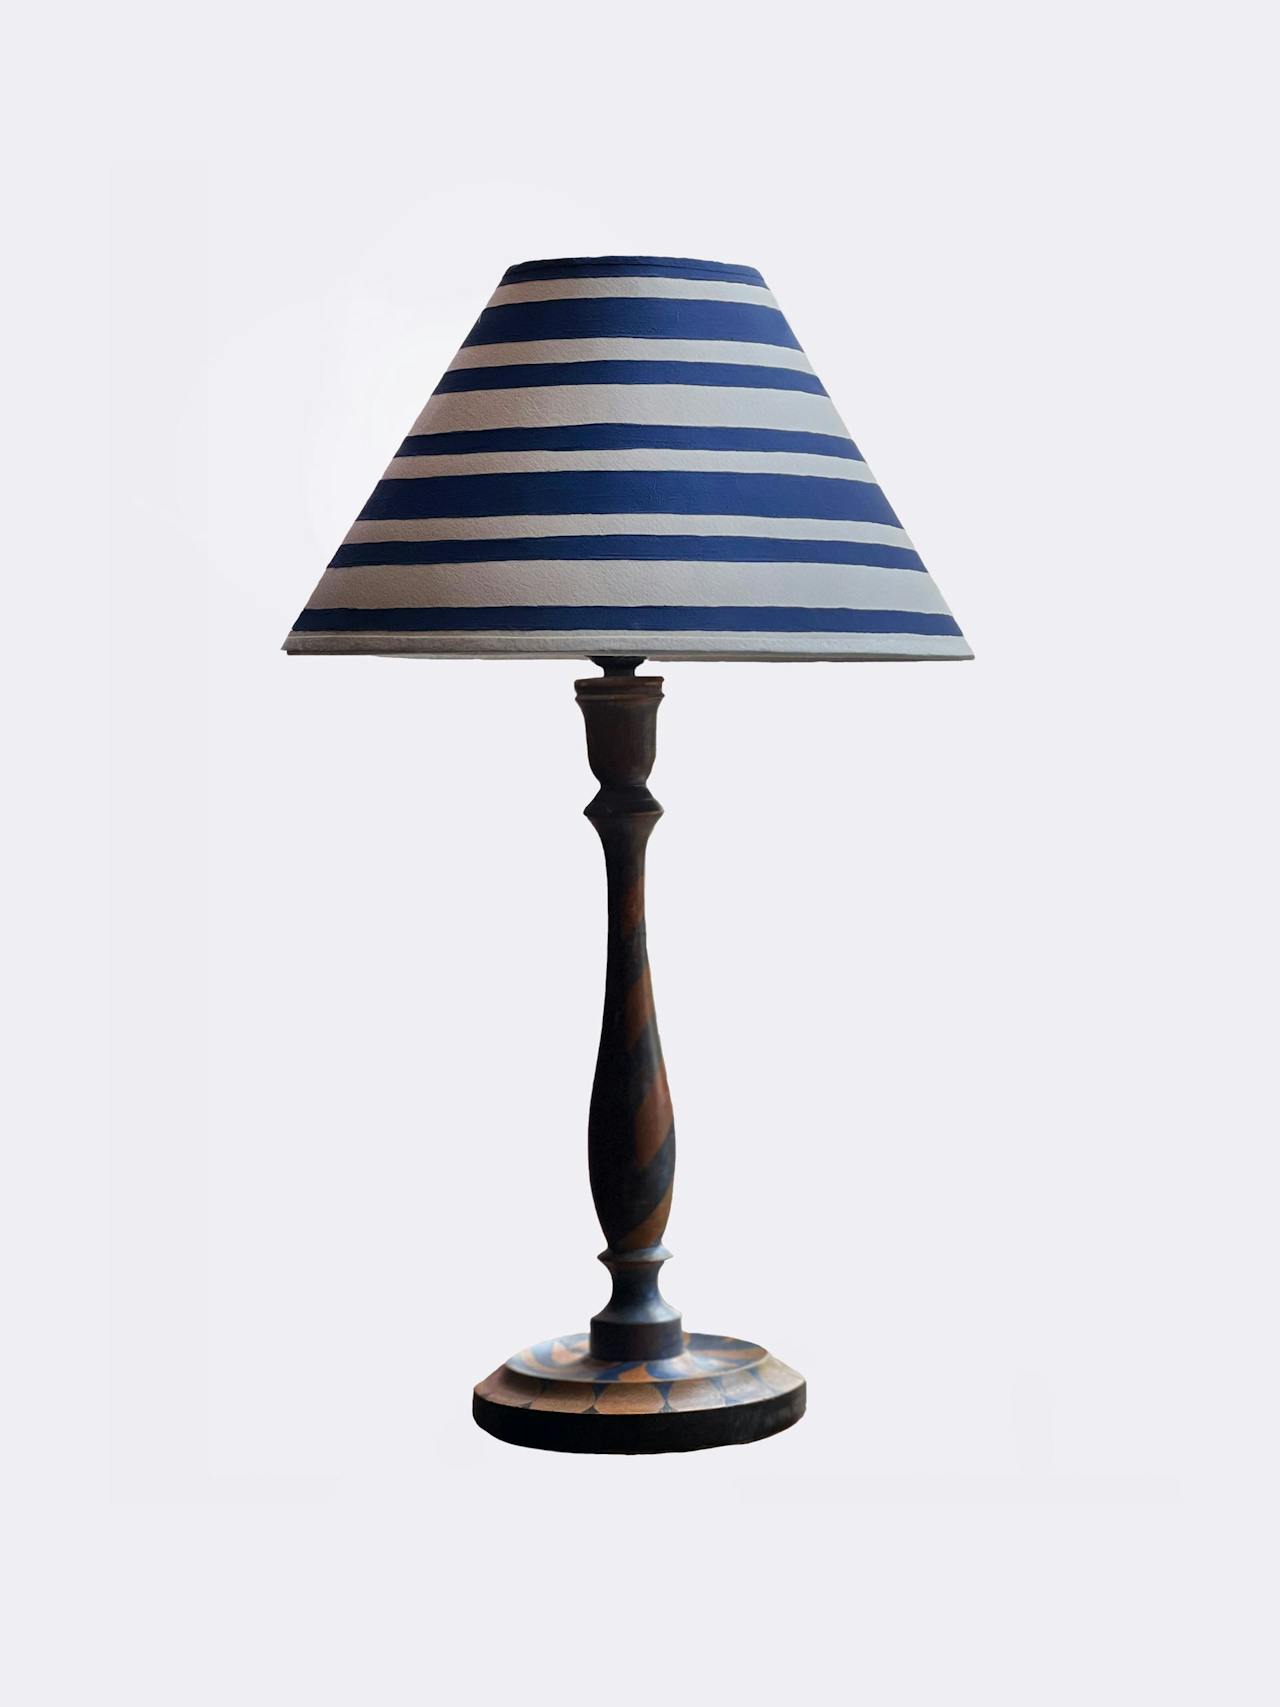 Serge Ticking Stripes coolie lampshade